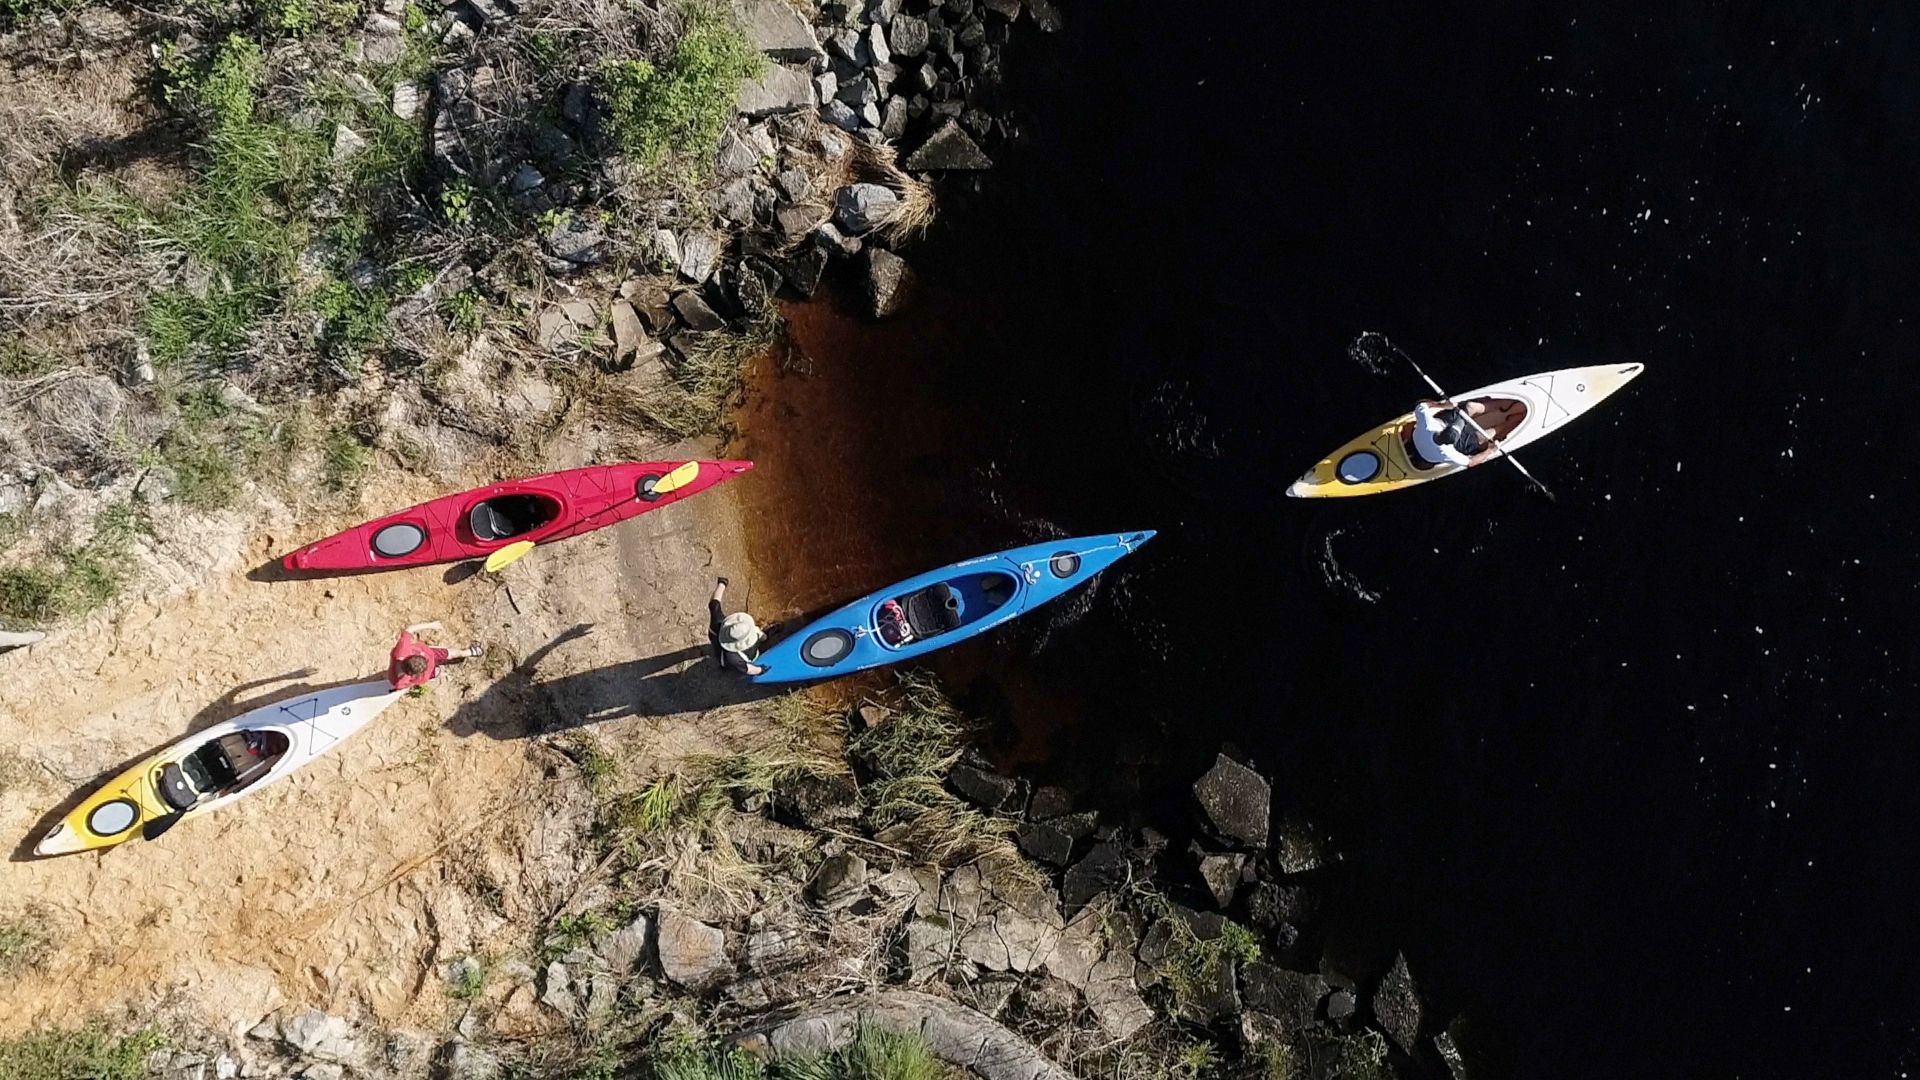 Four kayakers enter the water.